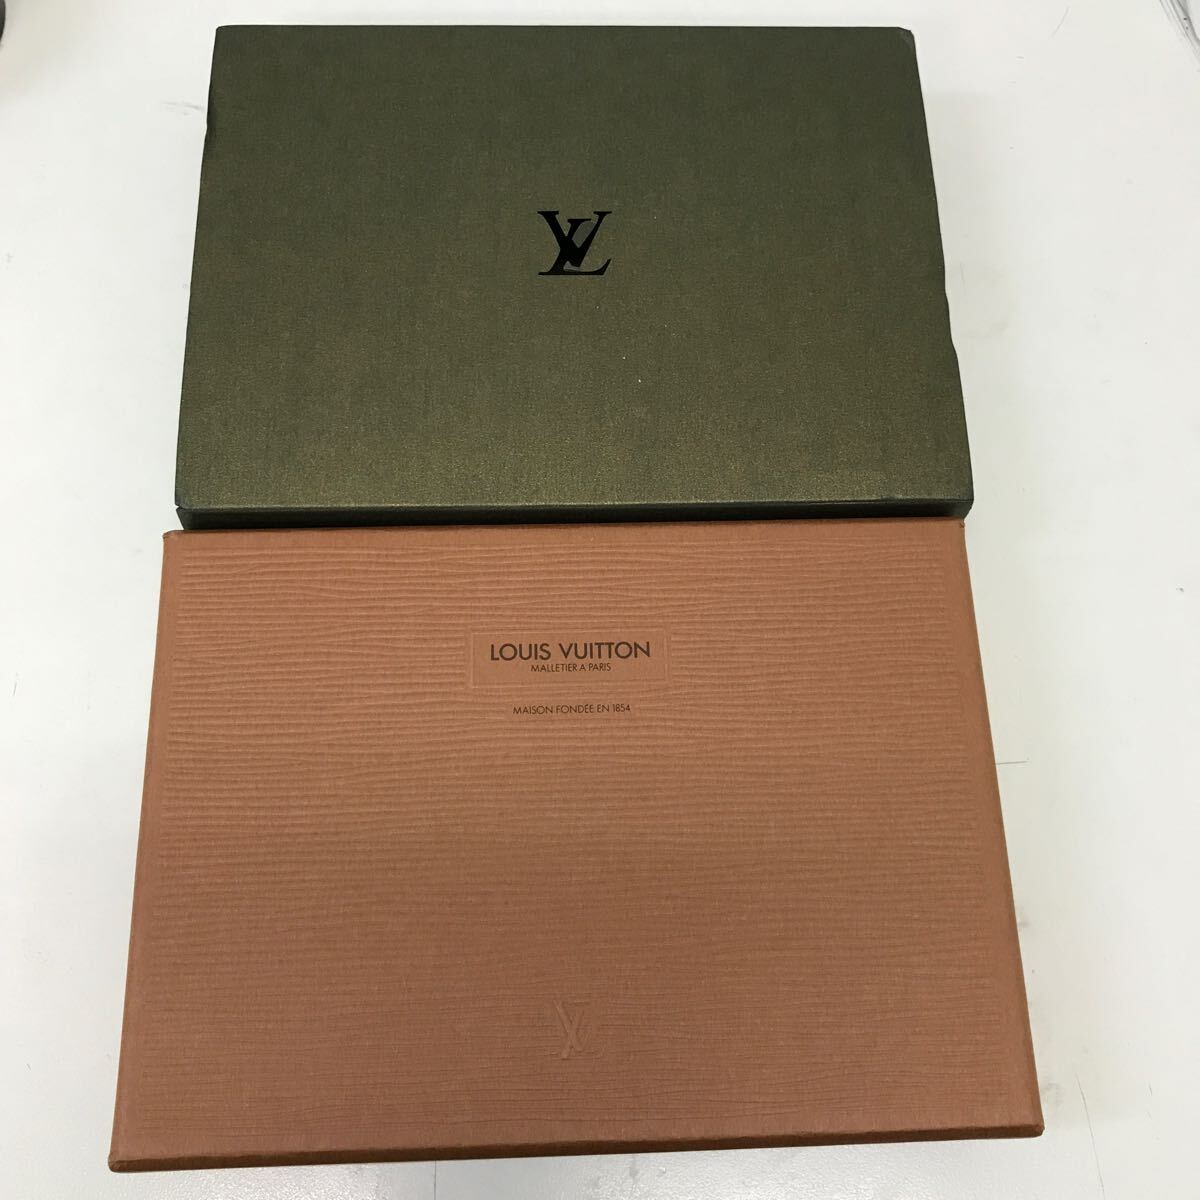 35231-1 0315Y LOUIS VUITTON ルイヴィトン 空き箱 空箱_画像1